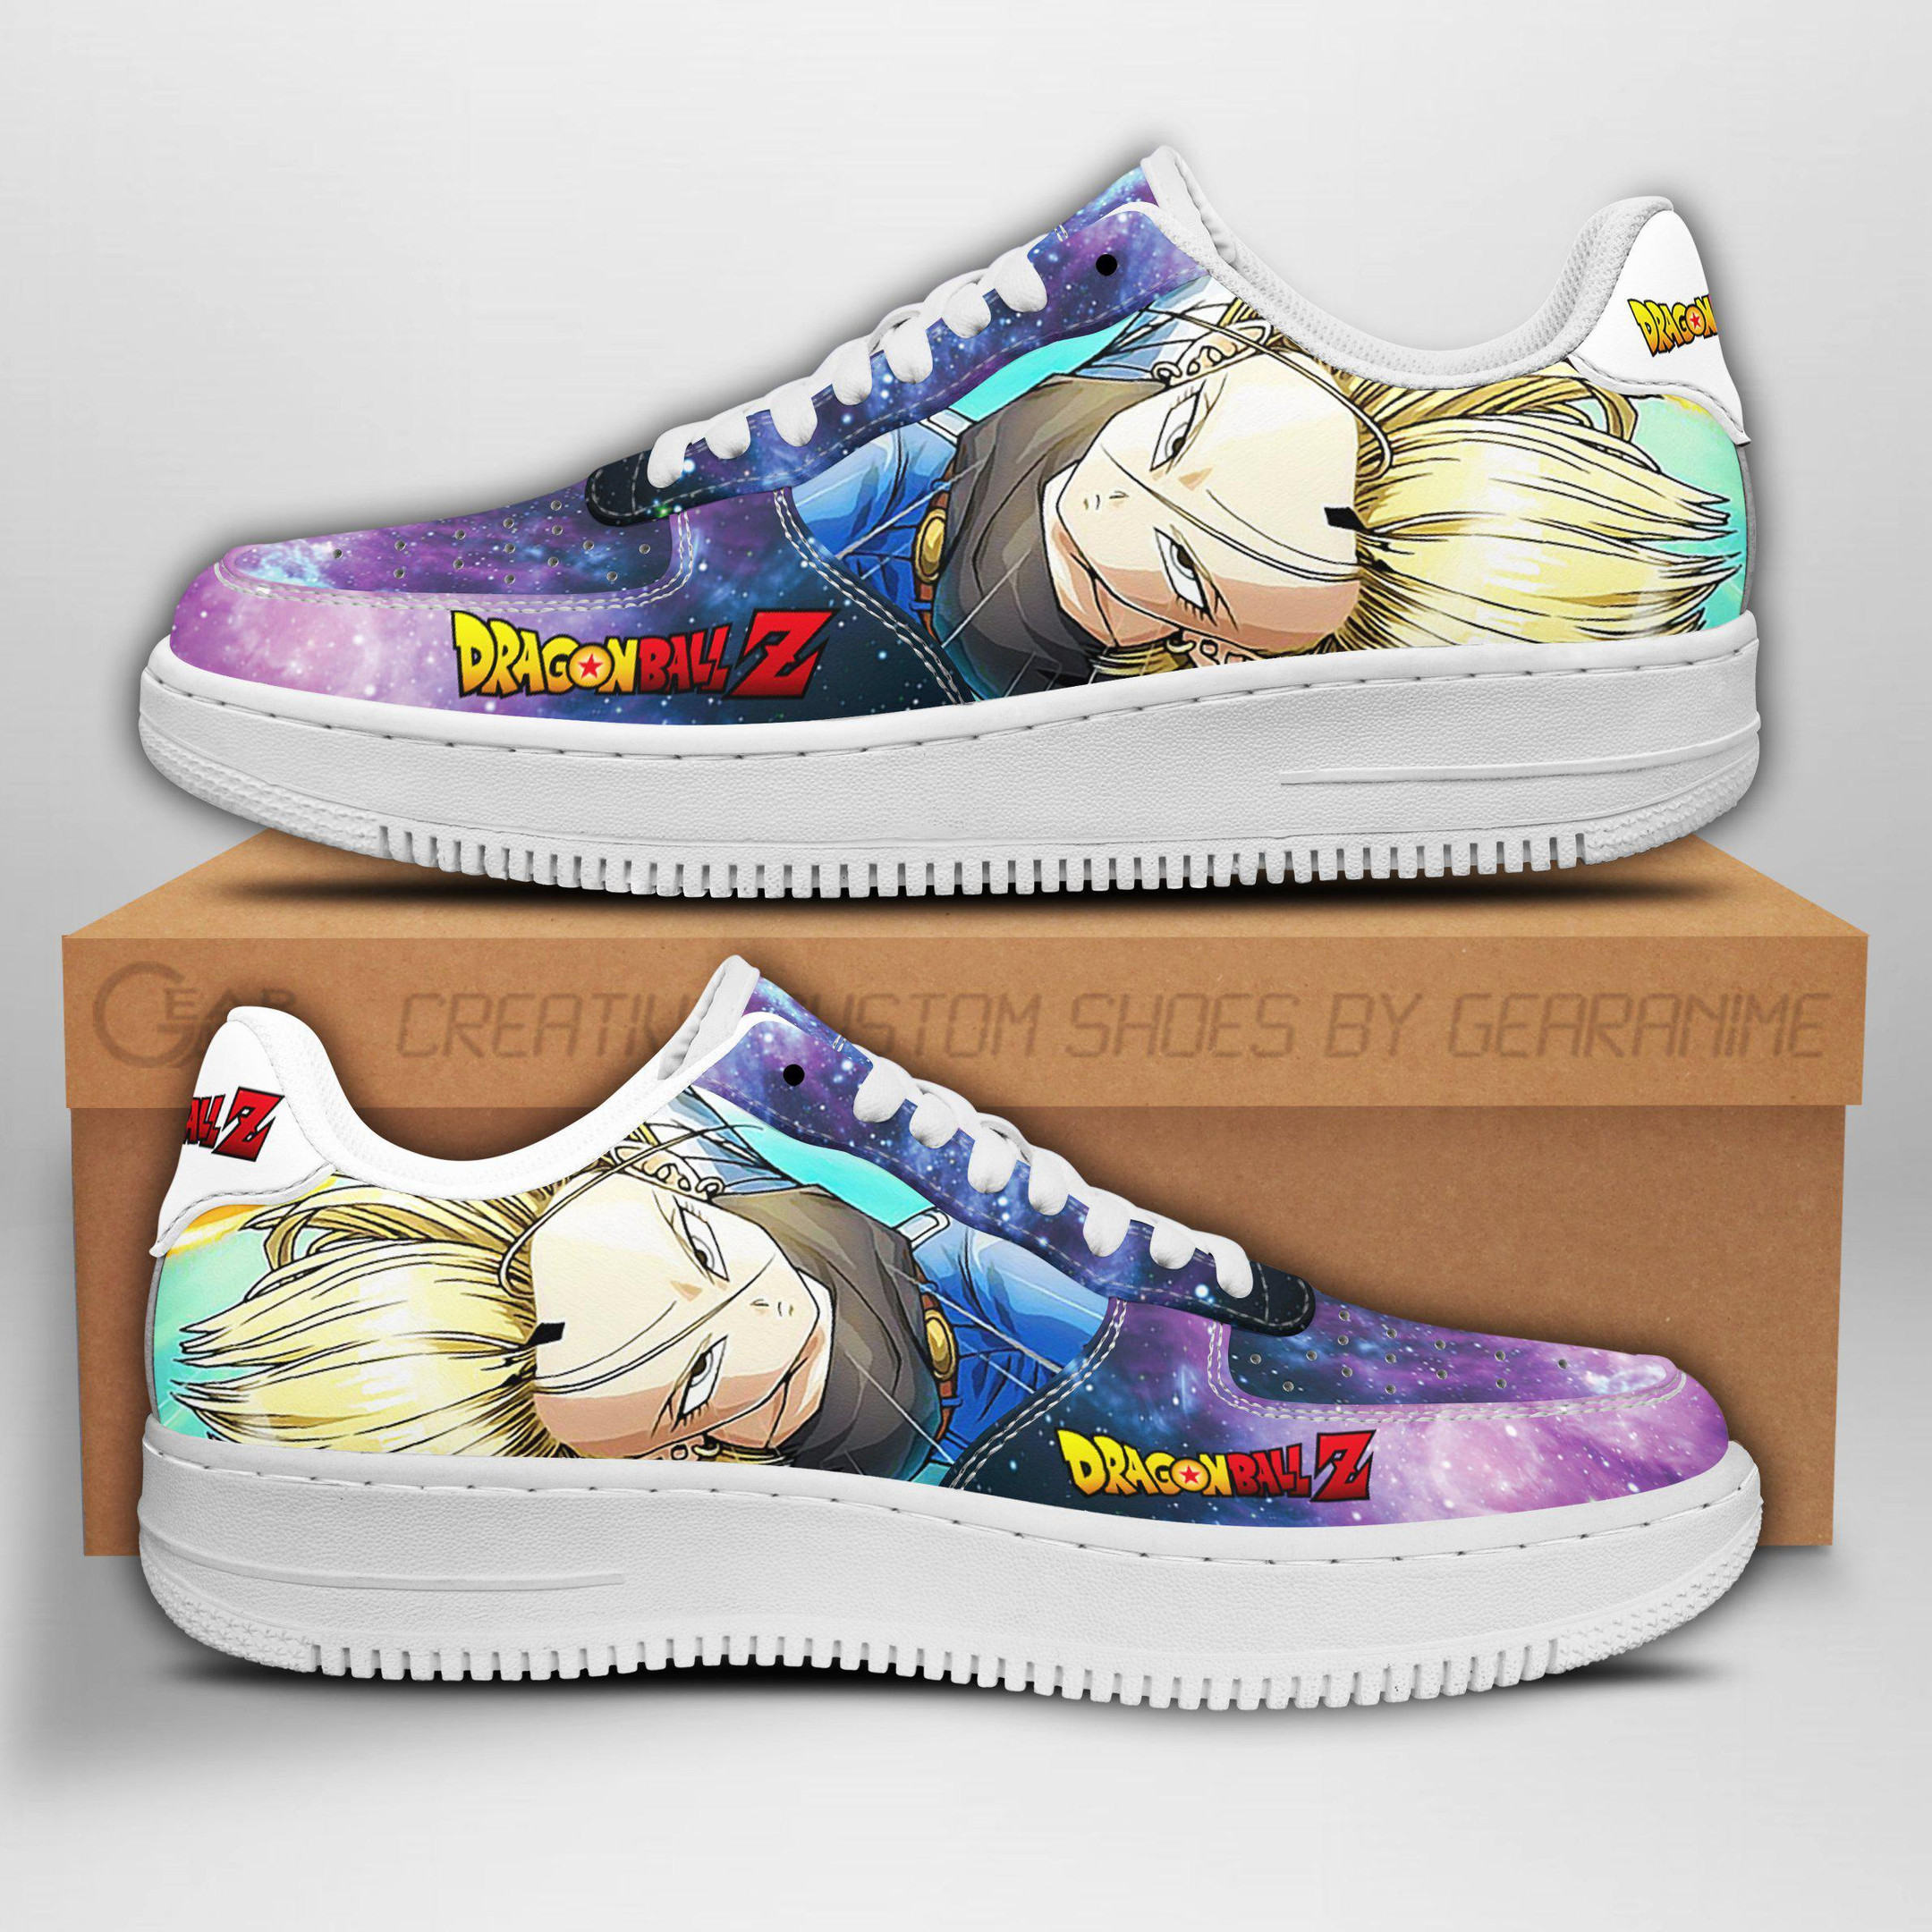 Android 18 Galaxy Anime Dragon Ball Nike Air Force shoes1